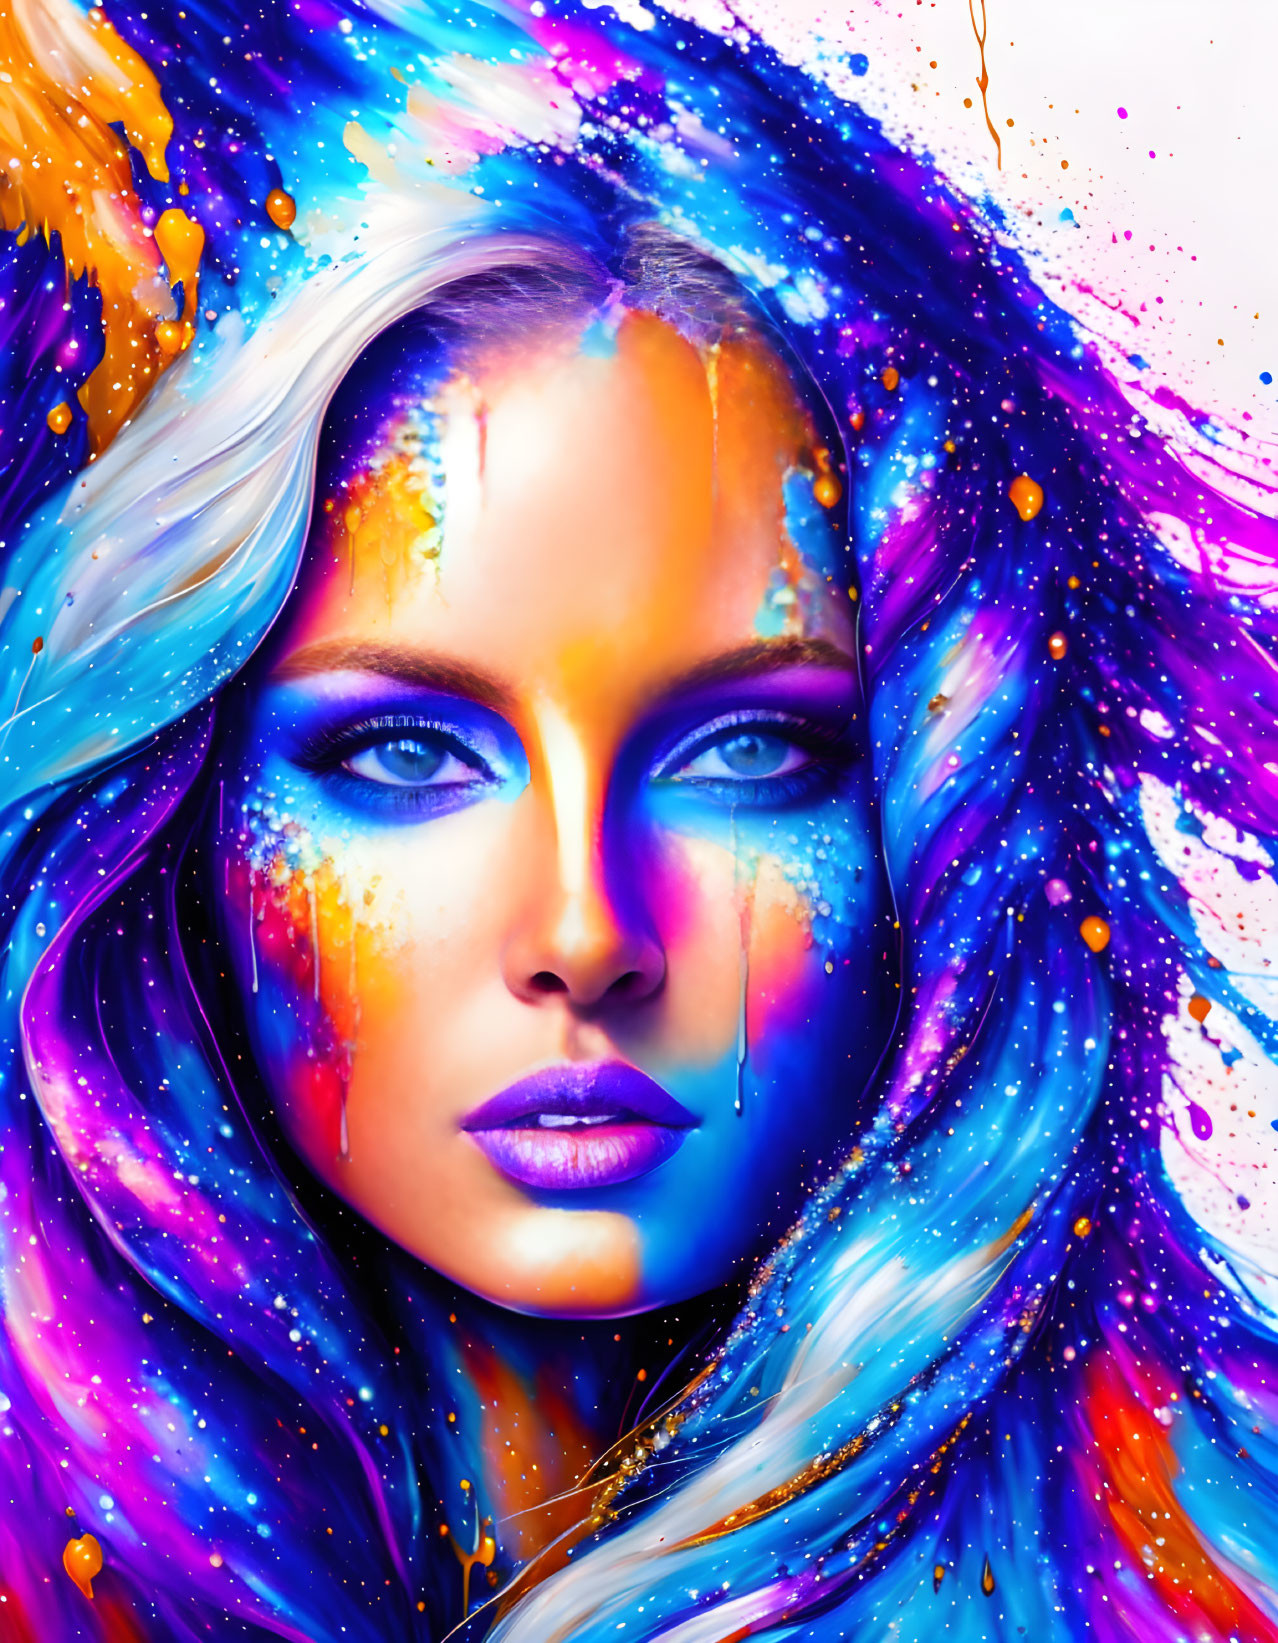 Colorful digital artwork of woman's face in blue and purple hues